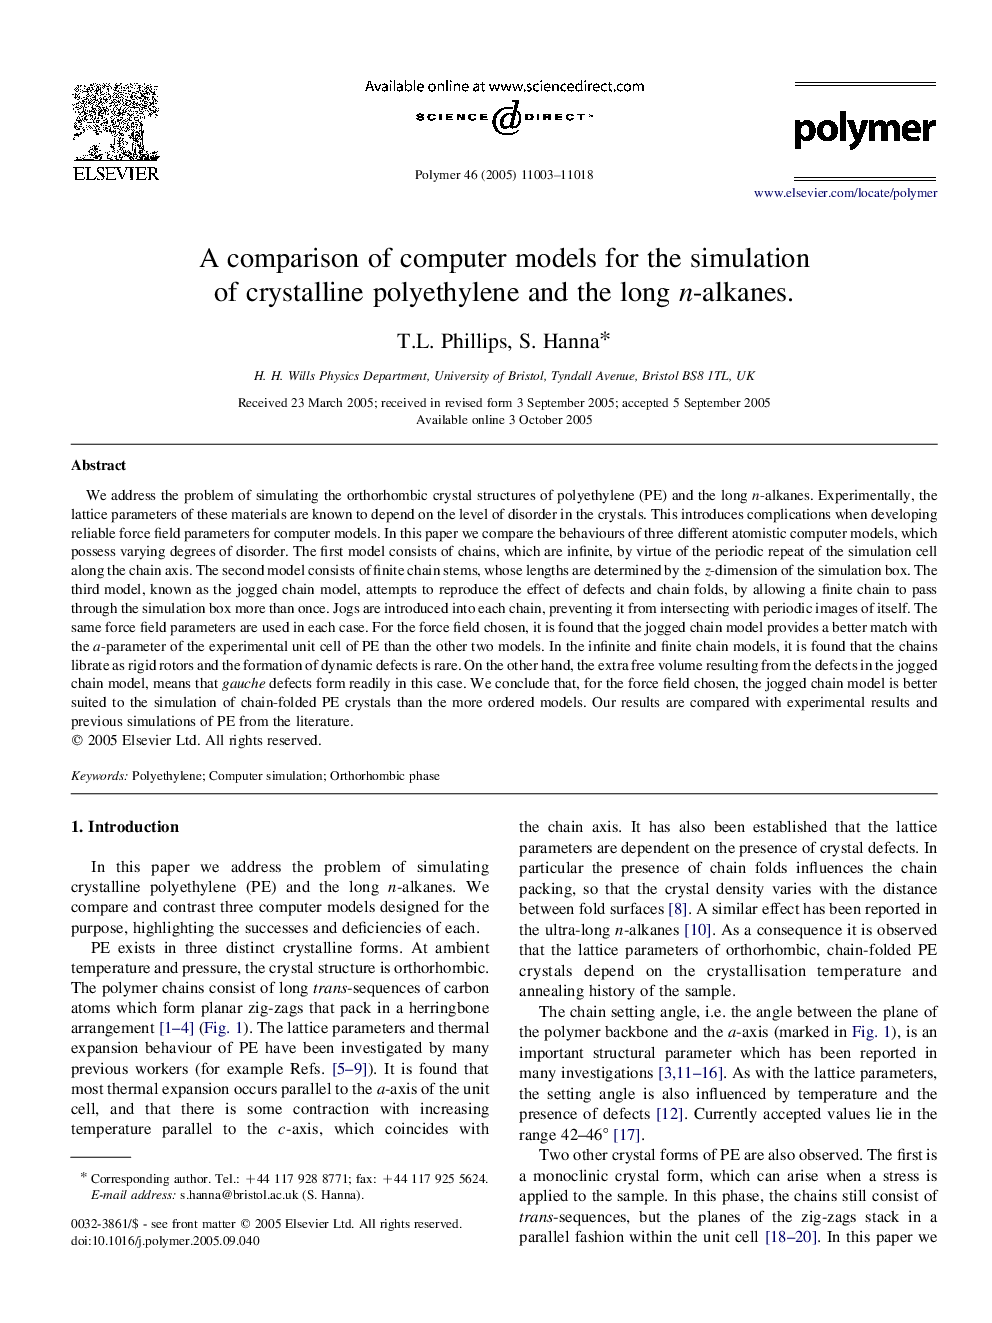 A comparison of computer models for the simulation of crystalline polyethylene and the long n-alkanes.